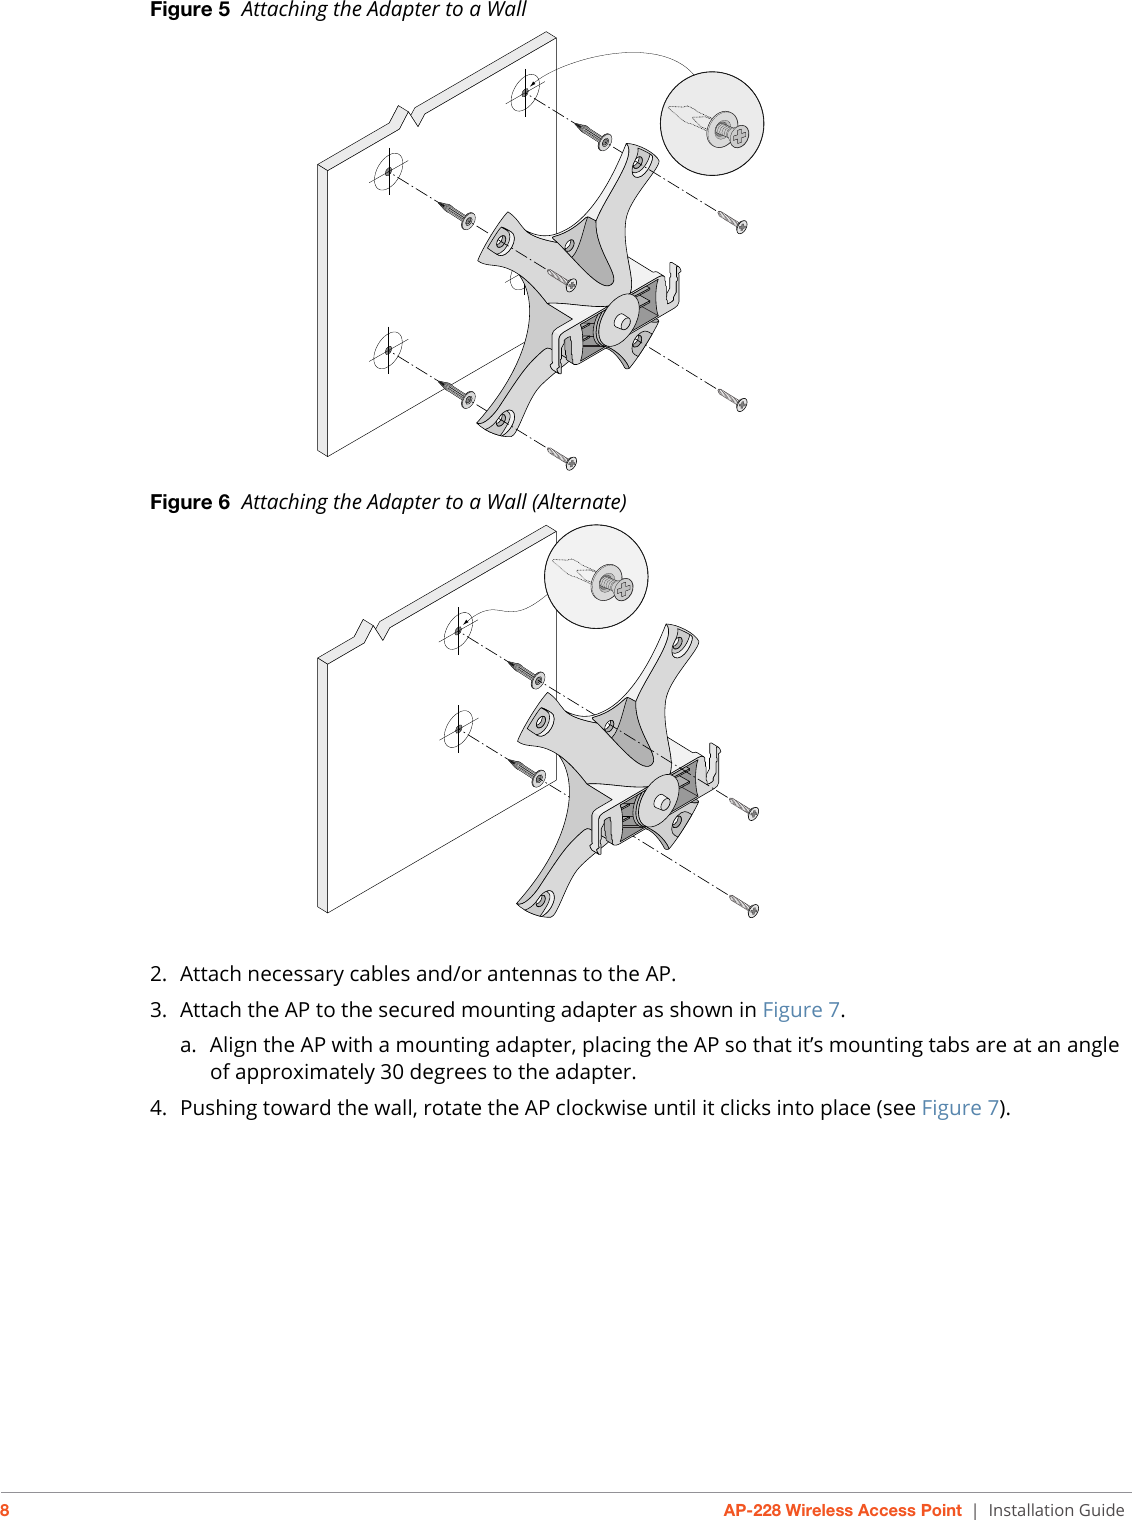 8AP-228 Wireless Access Point | Installation GuideFigure 5  Attaching the Adapter to a Wall Figure 6  Attaching the Adapter to a Wall (Alternate) 2. Attach necessary cables and/or antennas to the AP.3. Attach the AP to the secured mounting adapter as shown in Figure 7.a. Align the AP with a mounting adapter, placing the AP so that it’s mounting tabs are at an angle of approximately 30 degrees to the adapter.4. Pushing toward the wall, rotate the AP clockwise until it clicks into place (see Figure 7).AP-220_11AP-220_14